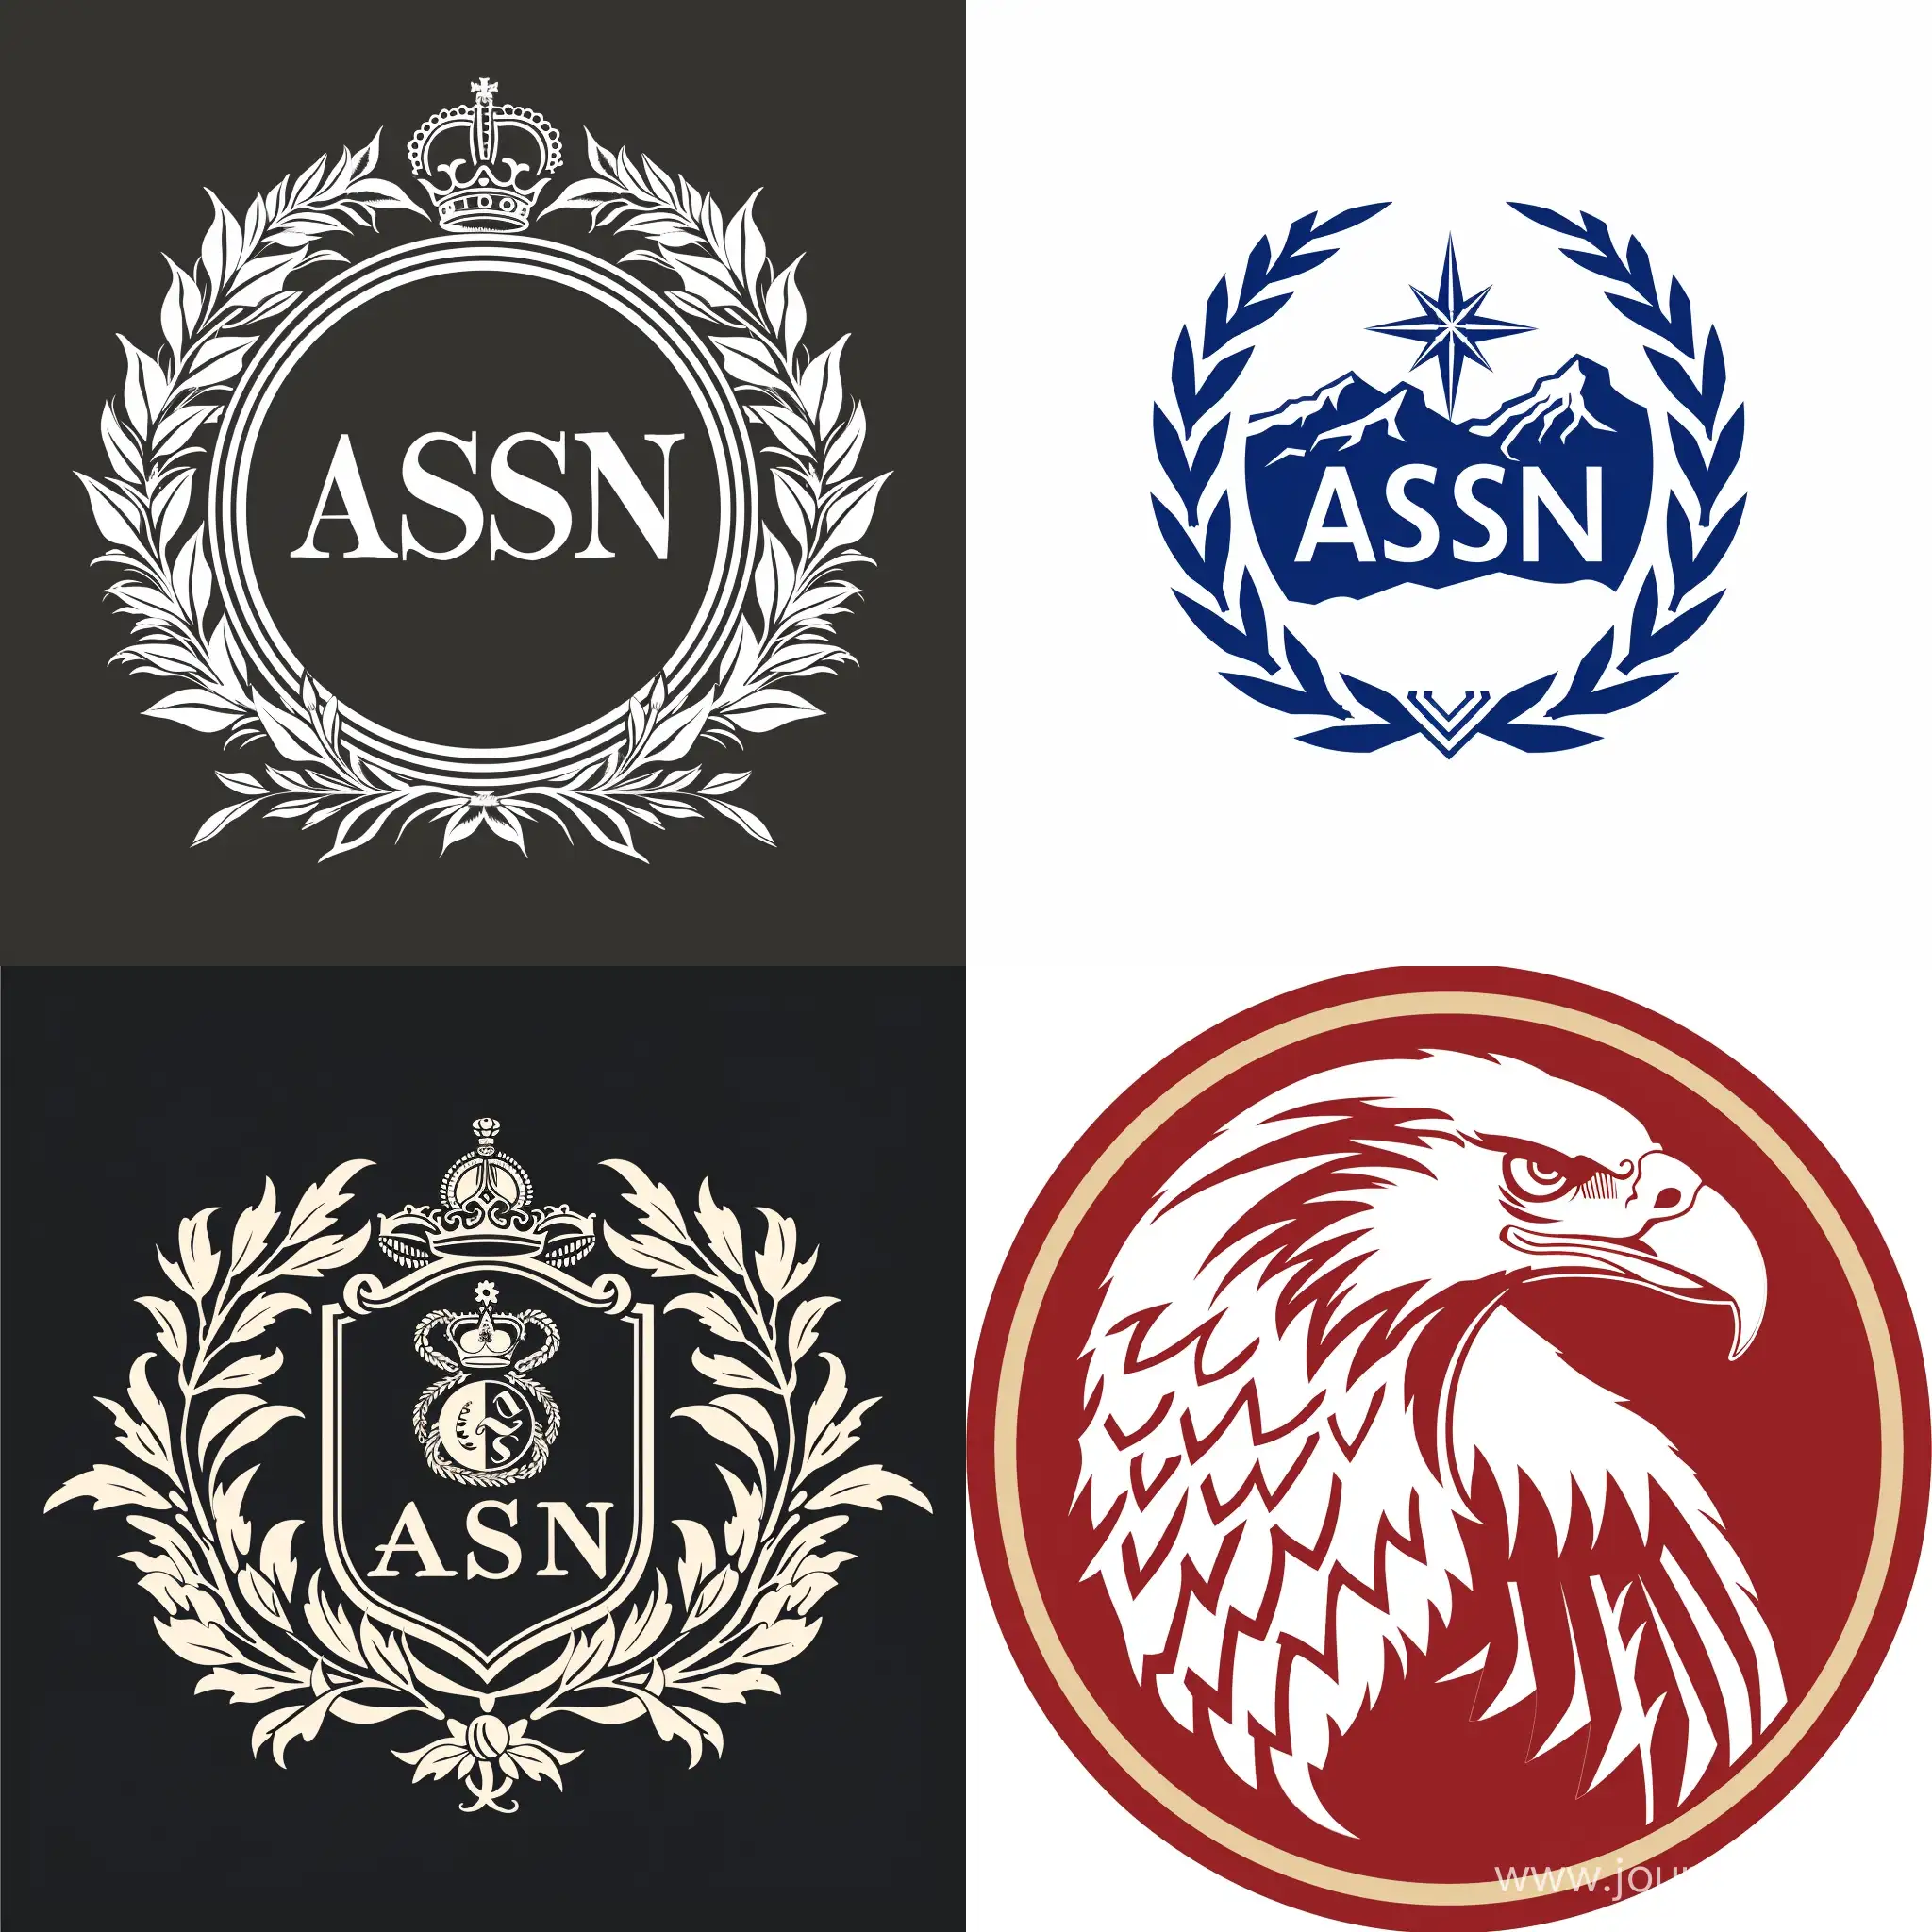 ASCN-Committee-Logo-with-Version-6-Aspect-Ratio-11-and-Unique-Design-Elements